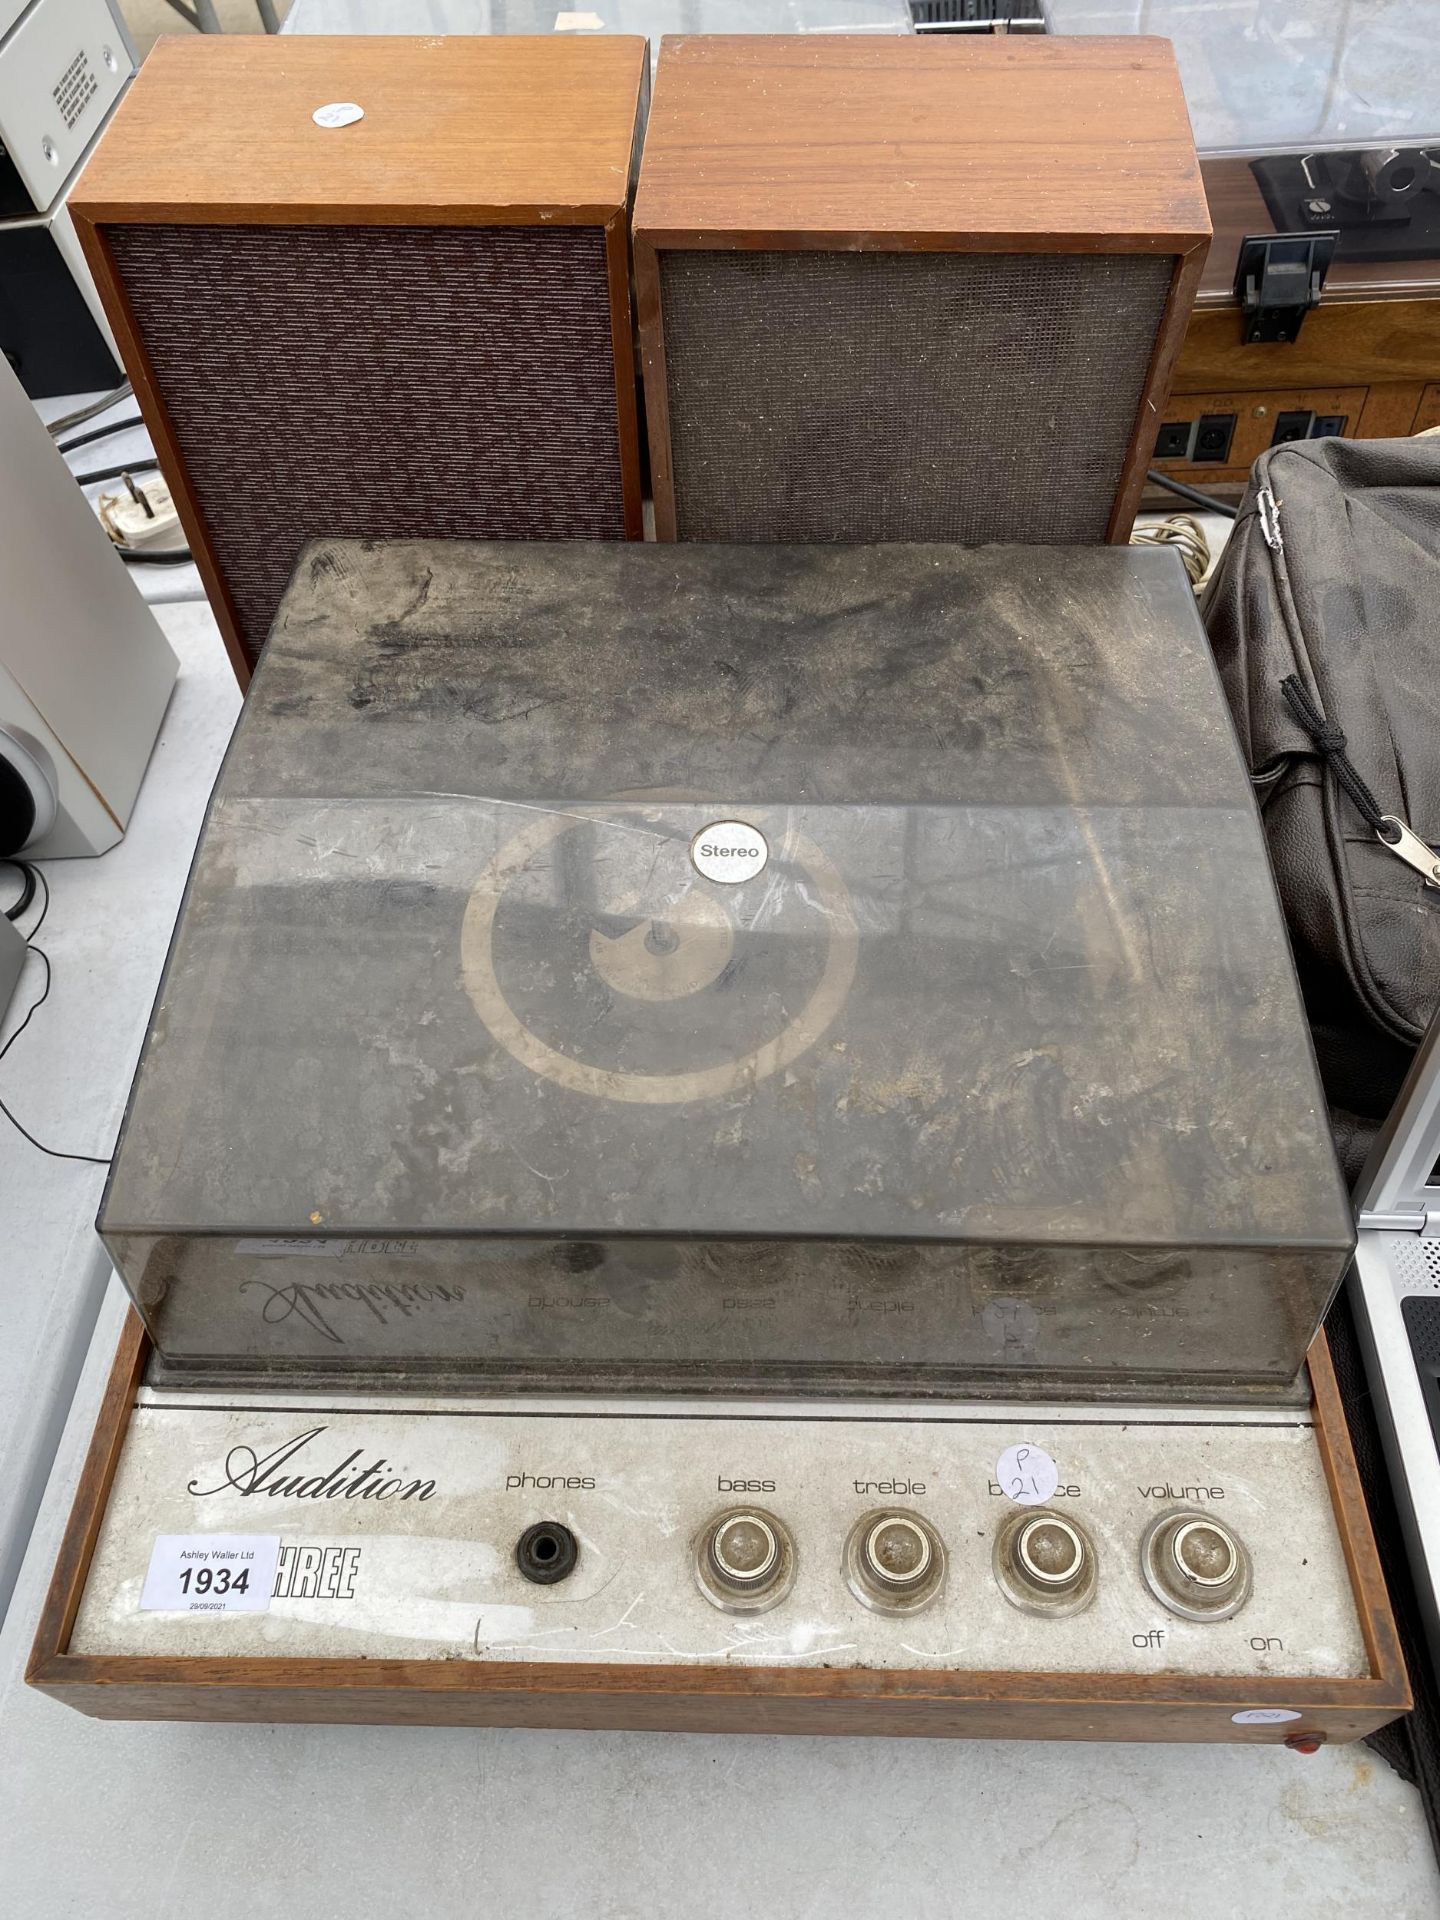 AN AUDITION RECORD PLAYER WITH TWO SPEAKERS